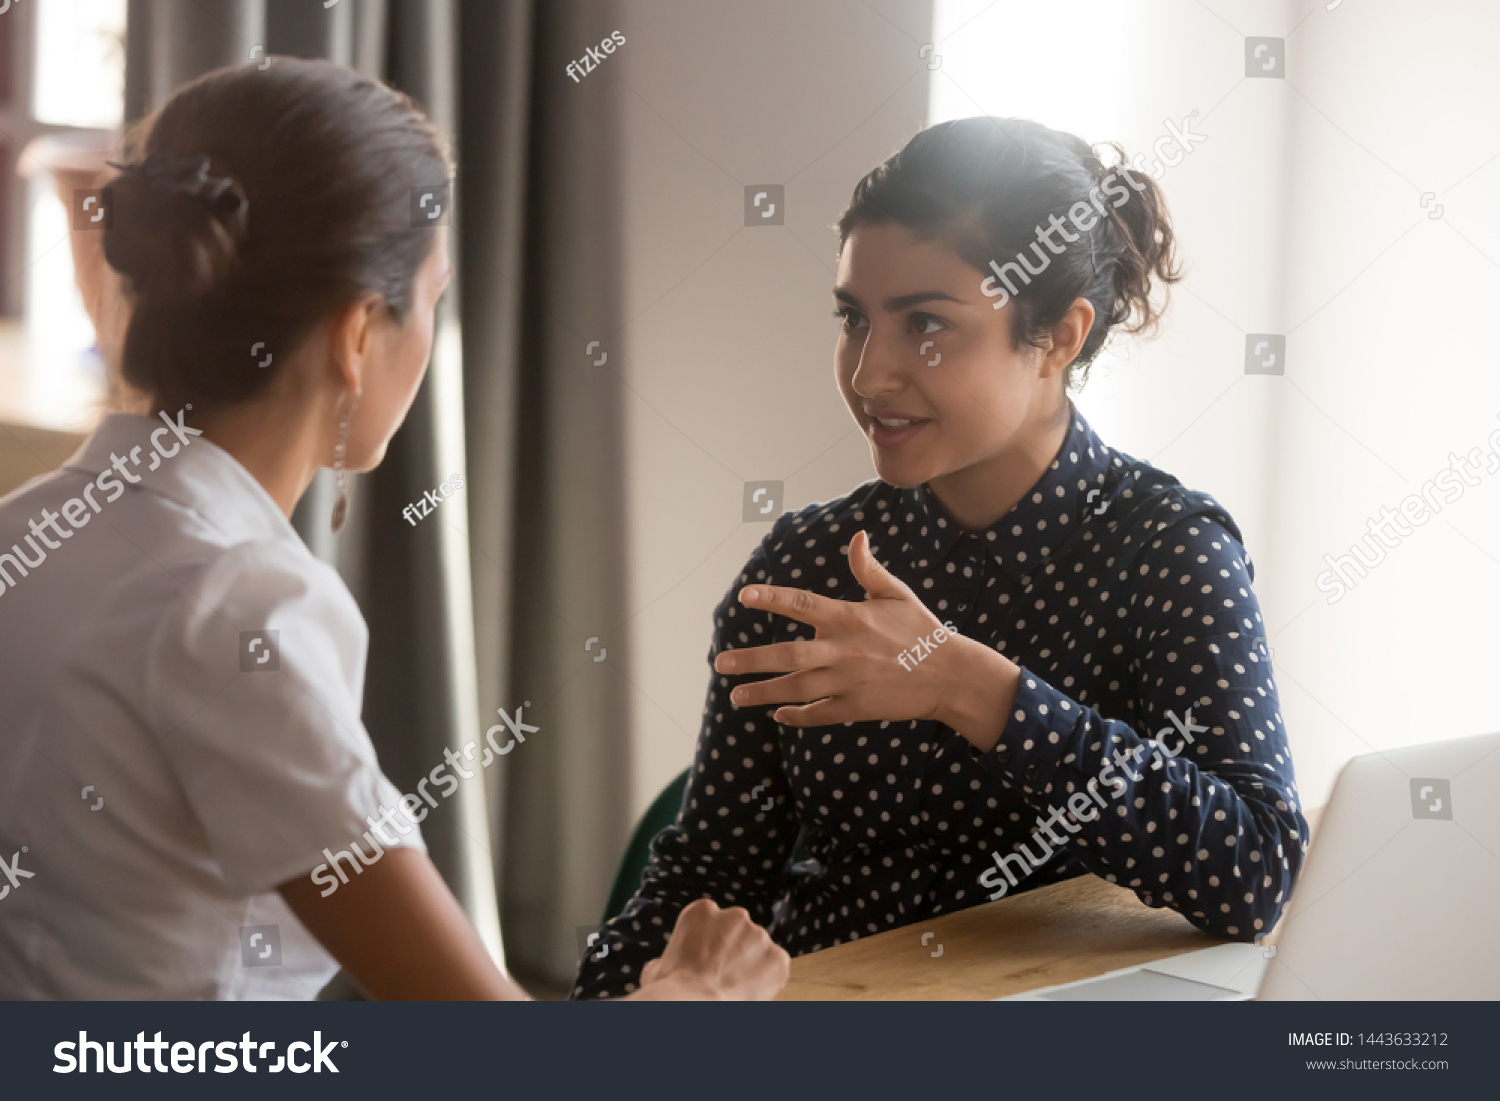 Serious indian mentor teacher worker talk to female colleague teach intern discussing new skills learning sit at work desk, two diverse coworkers work together help cooperate on project in teamwork